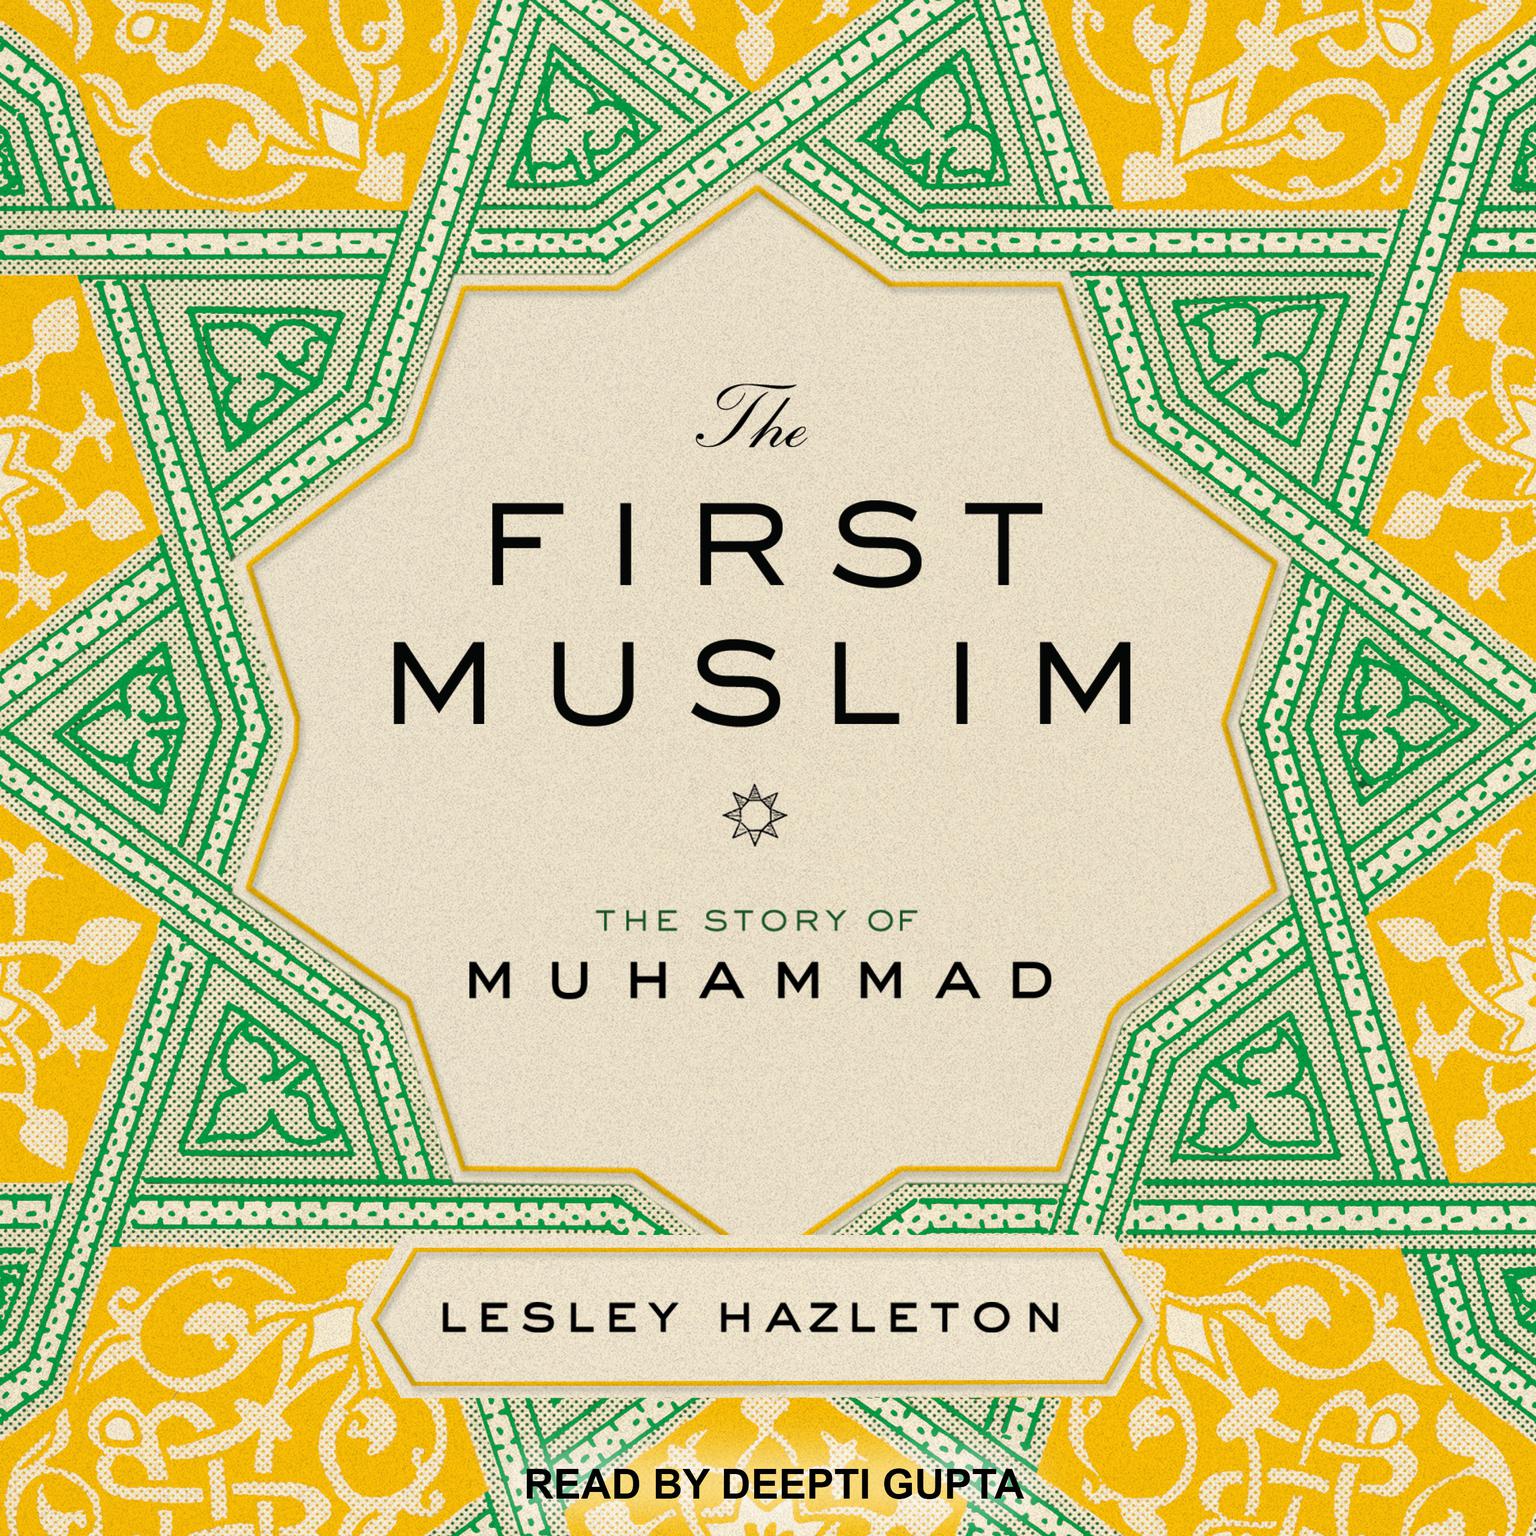 The First Muslim: The Story of Muhammad Audiobook, by Lesley Hazleton